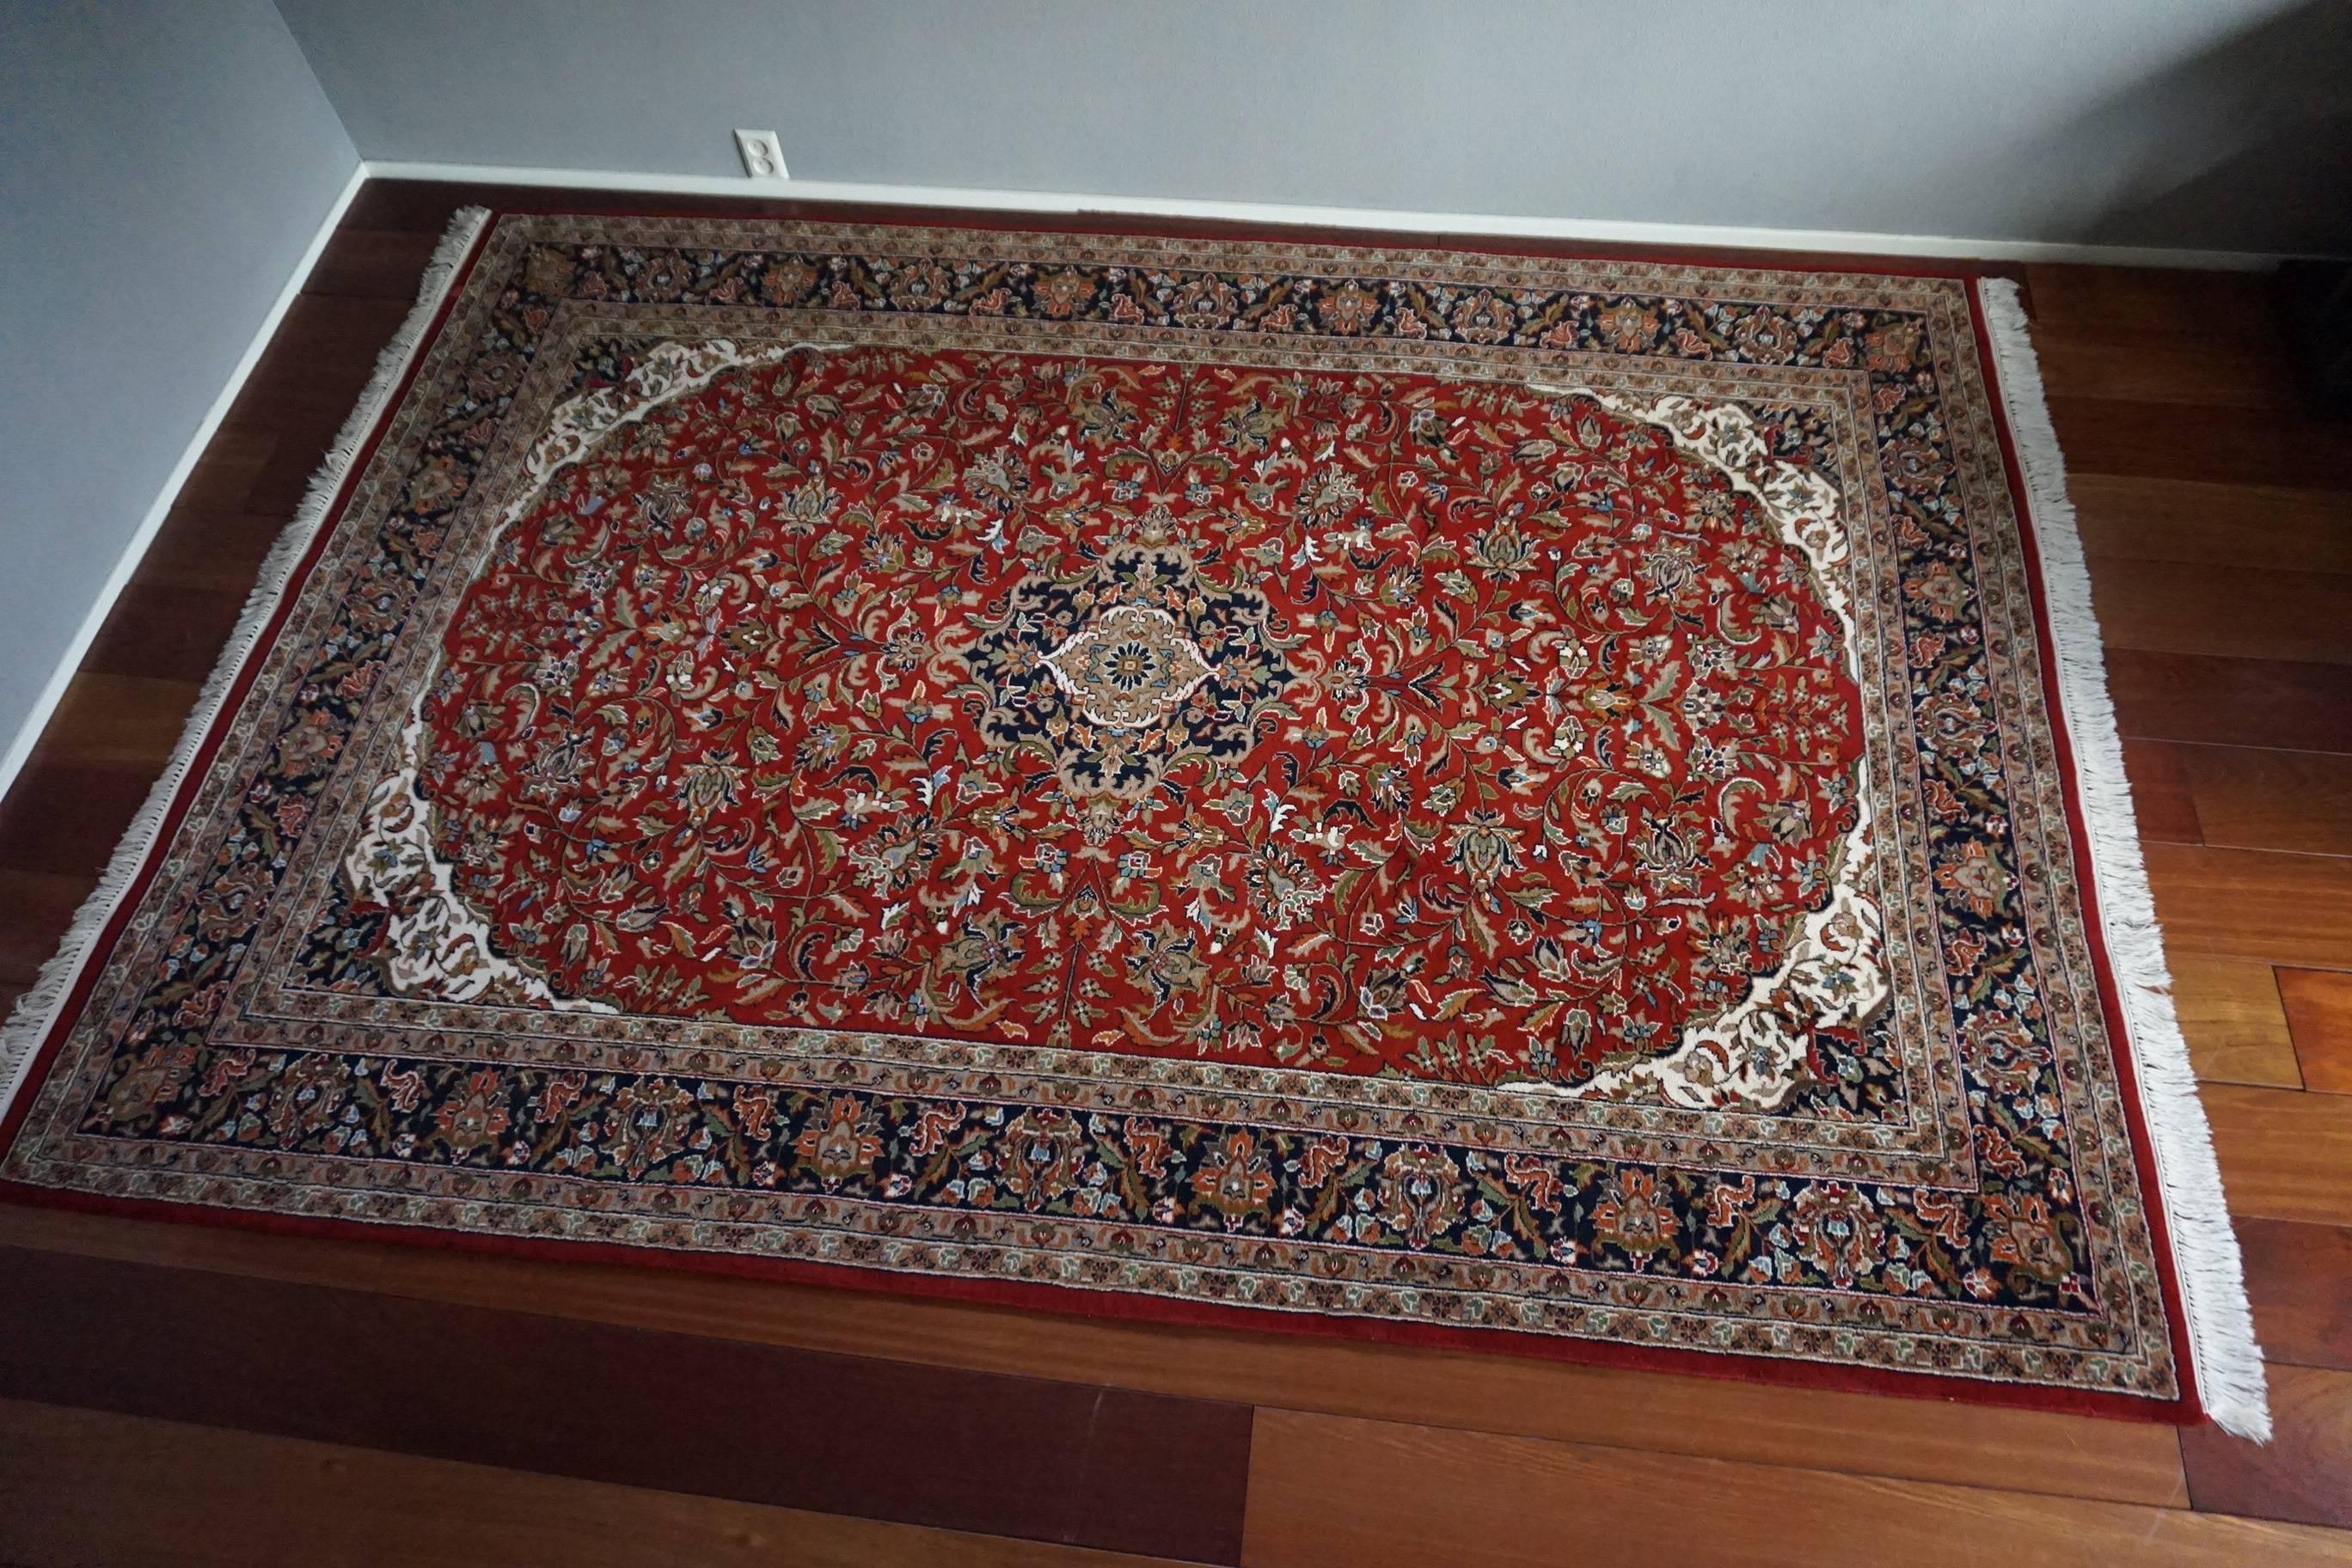 Ideal size and wonderful condition rug.

When it comes to decorating the floor of your home we cannot think of a better way then with a good quality and clean rug. This stylish and hand-knotted rug has the most beautiful motifs and colors and they